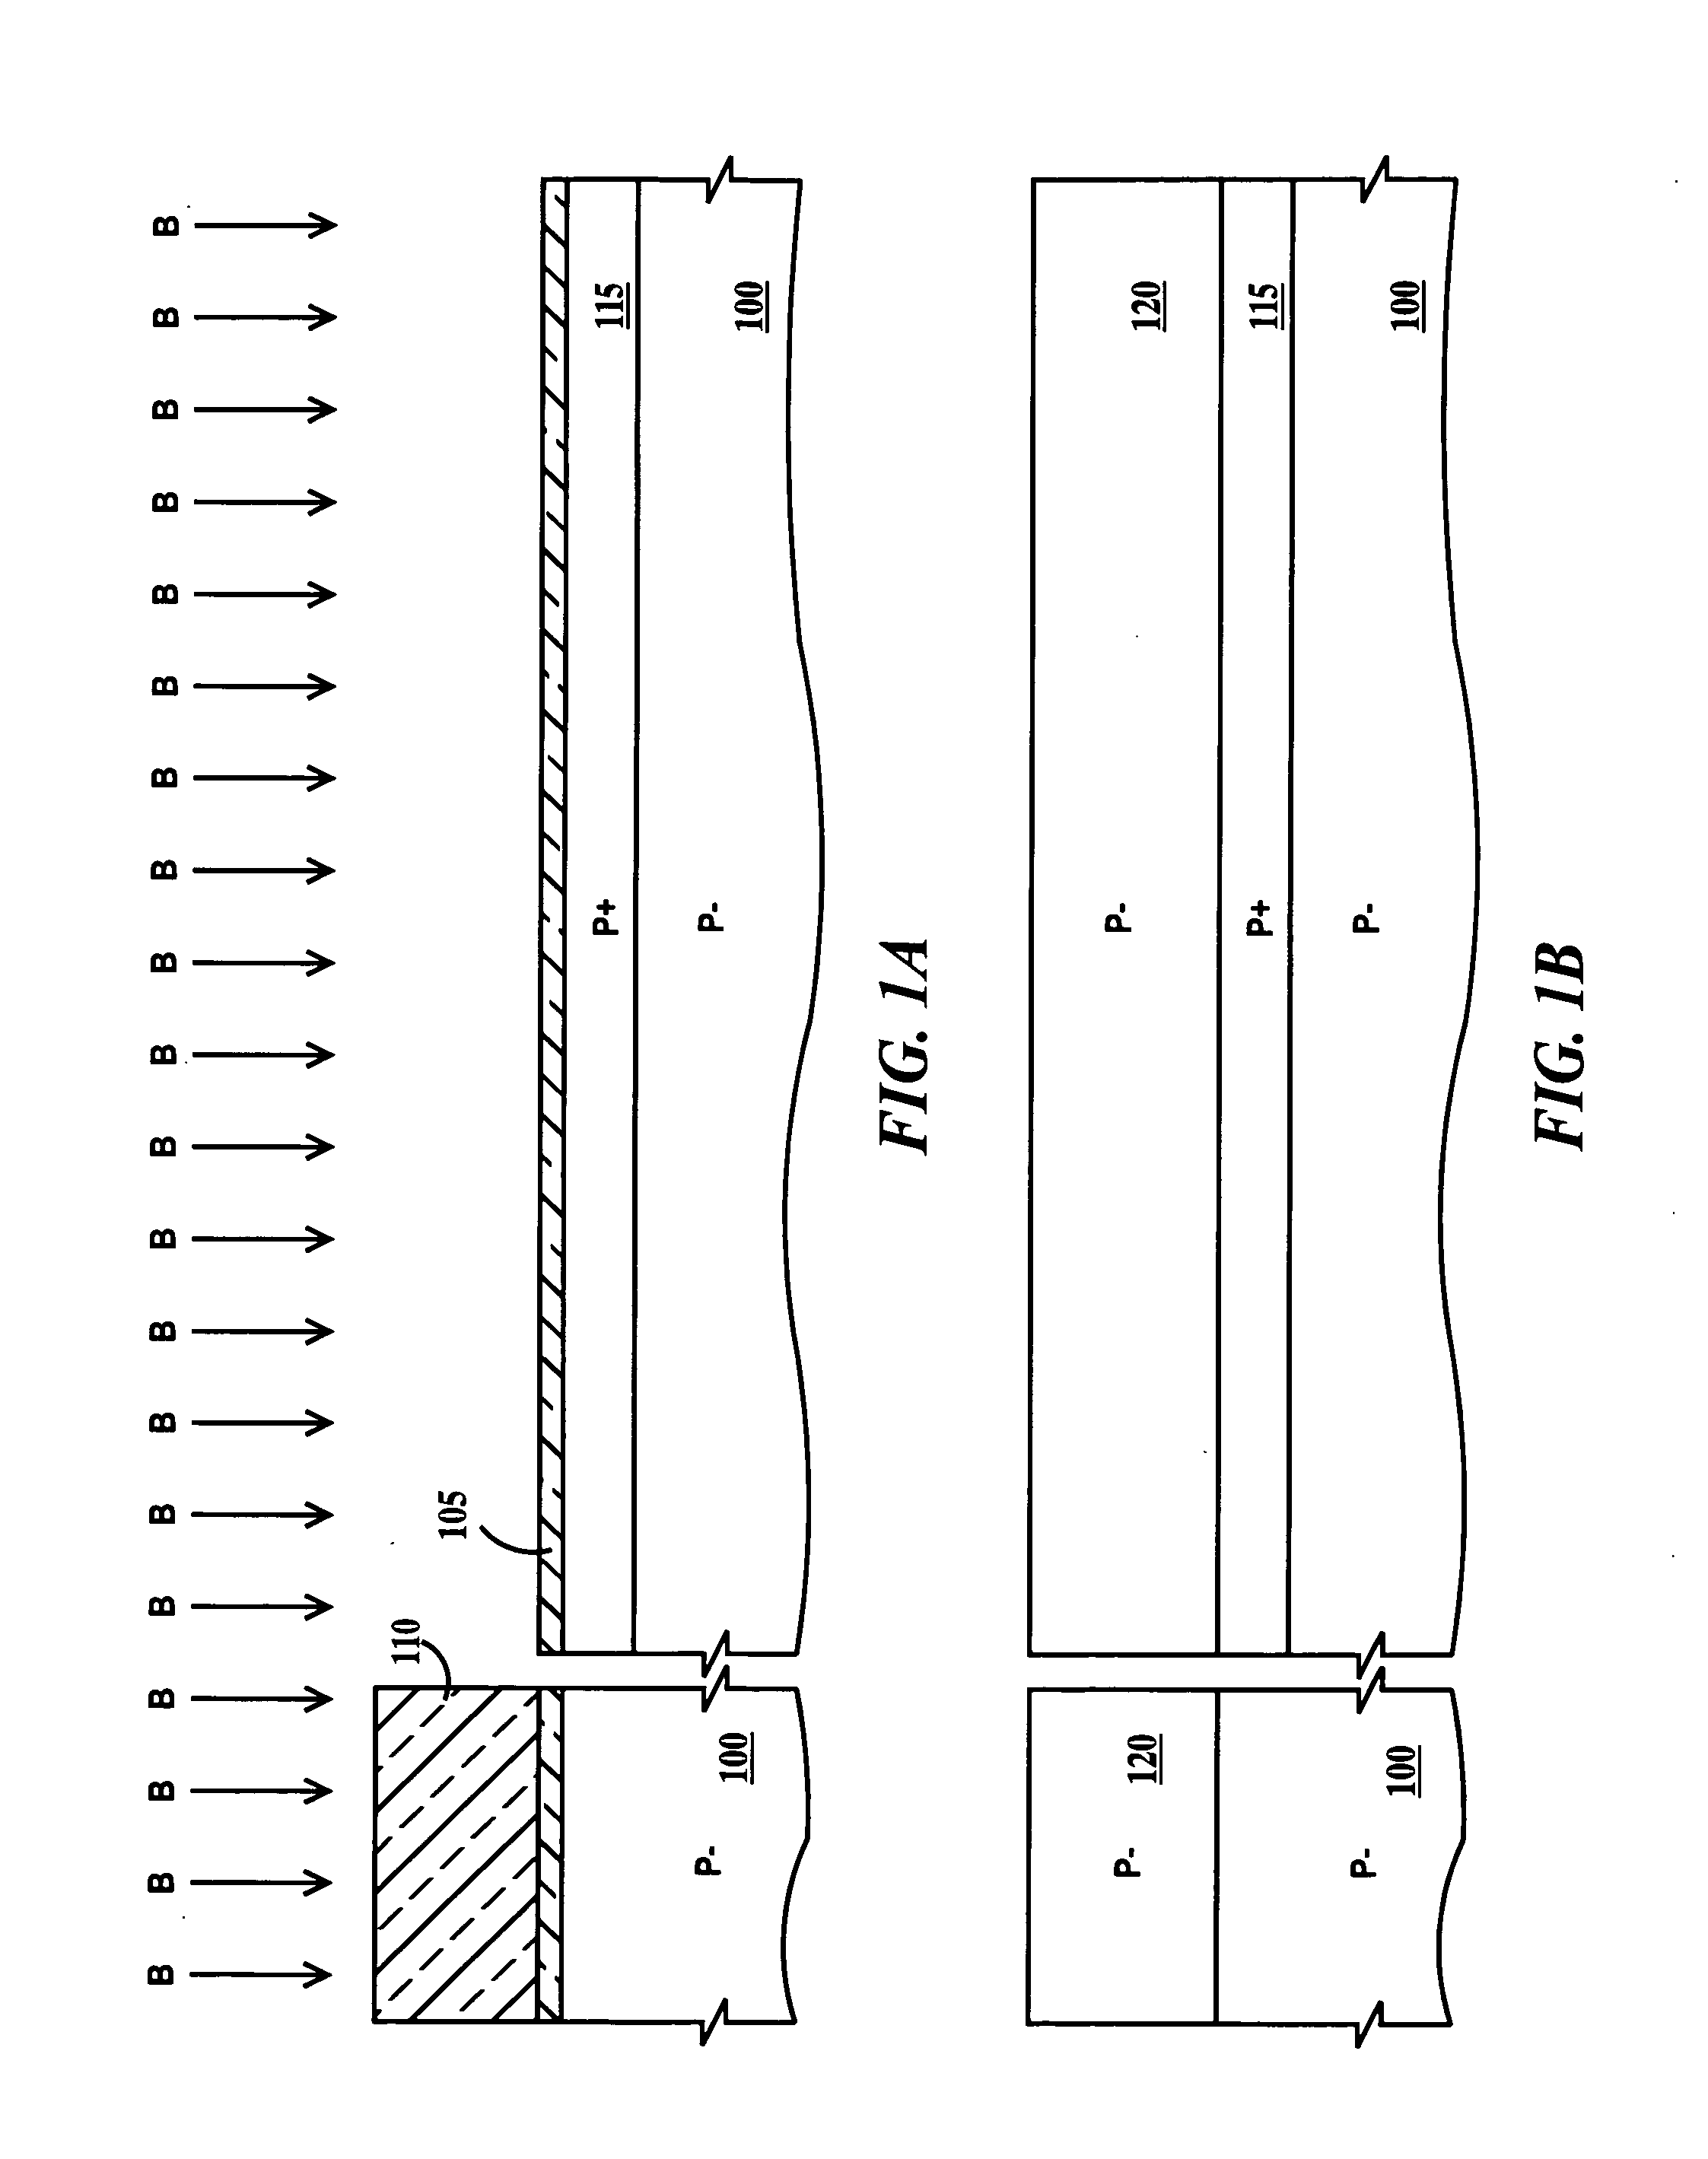 Triple-well CMOS devices with increased latch-up immunity and methods of fabricating same